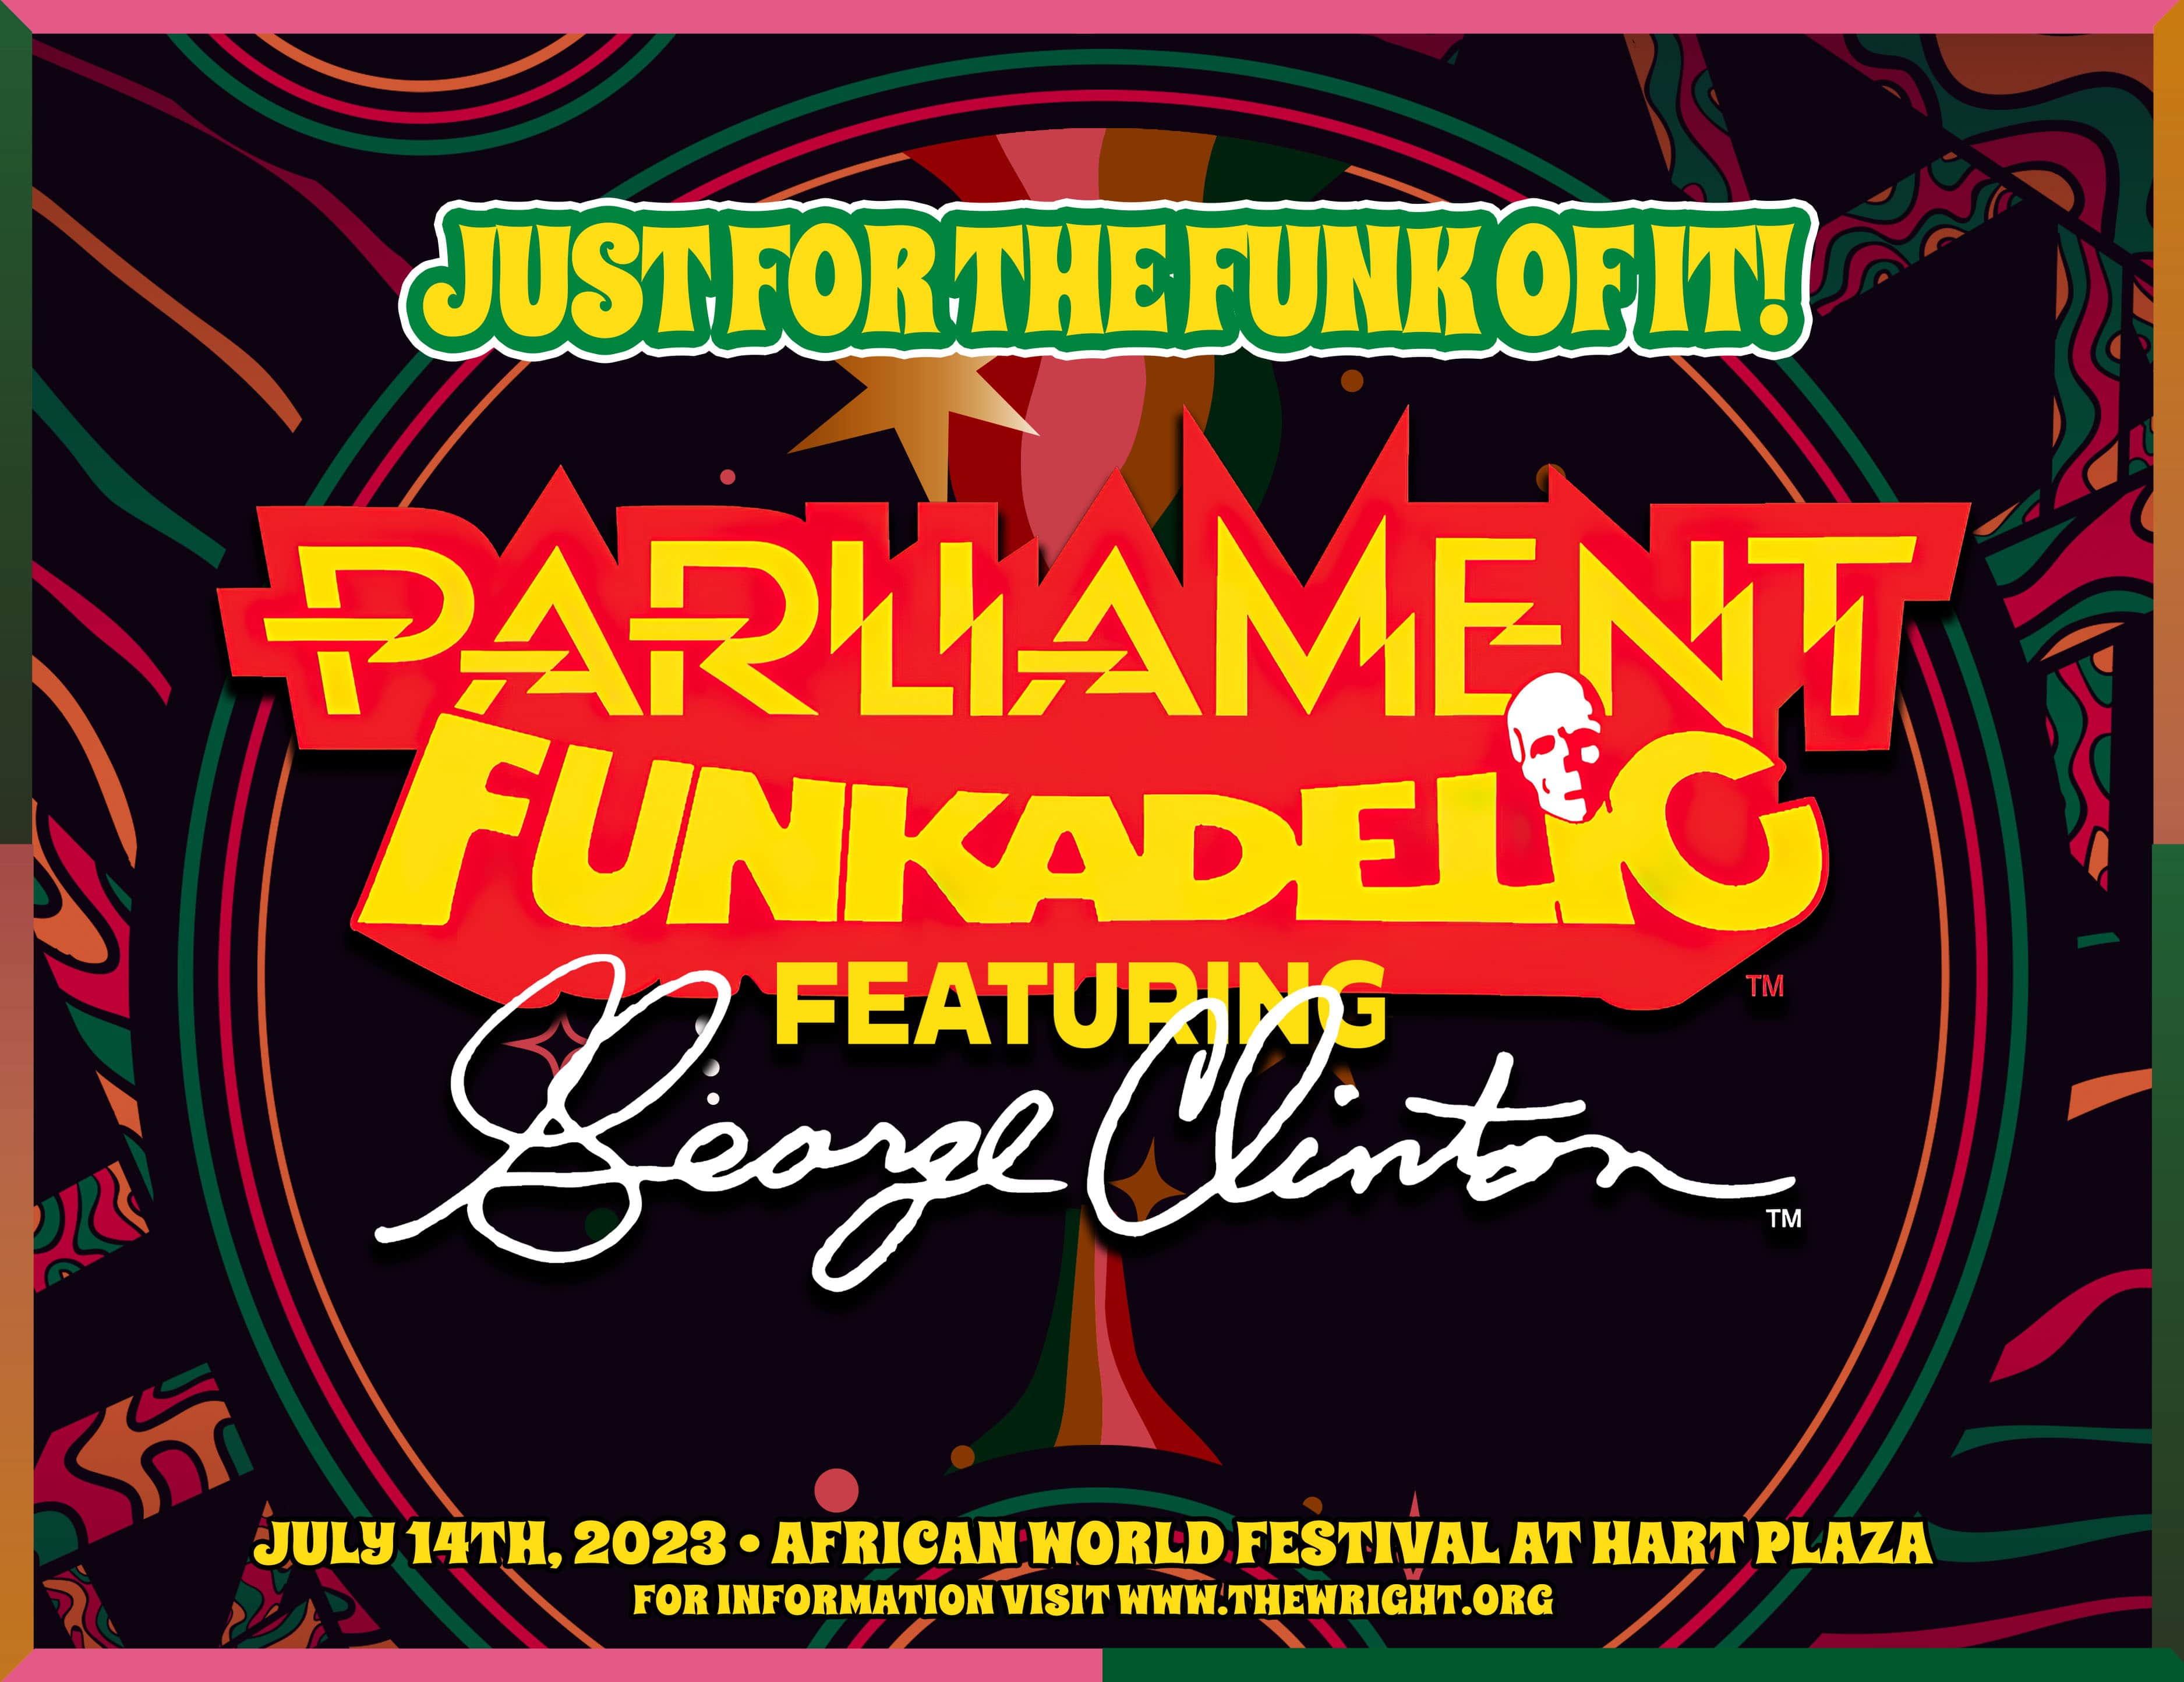 Just for the Funk of It! Parliament Funkadelic Featuring George Clinton. July 14th, 2023 — African World Festival at Hart Plaza.